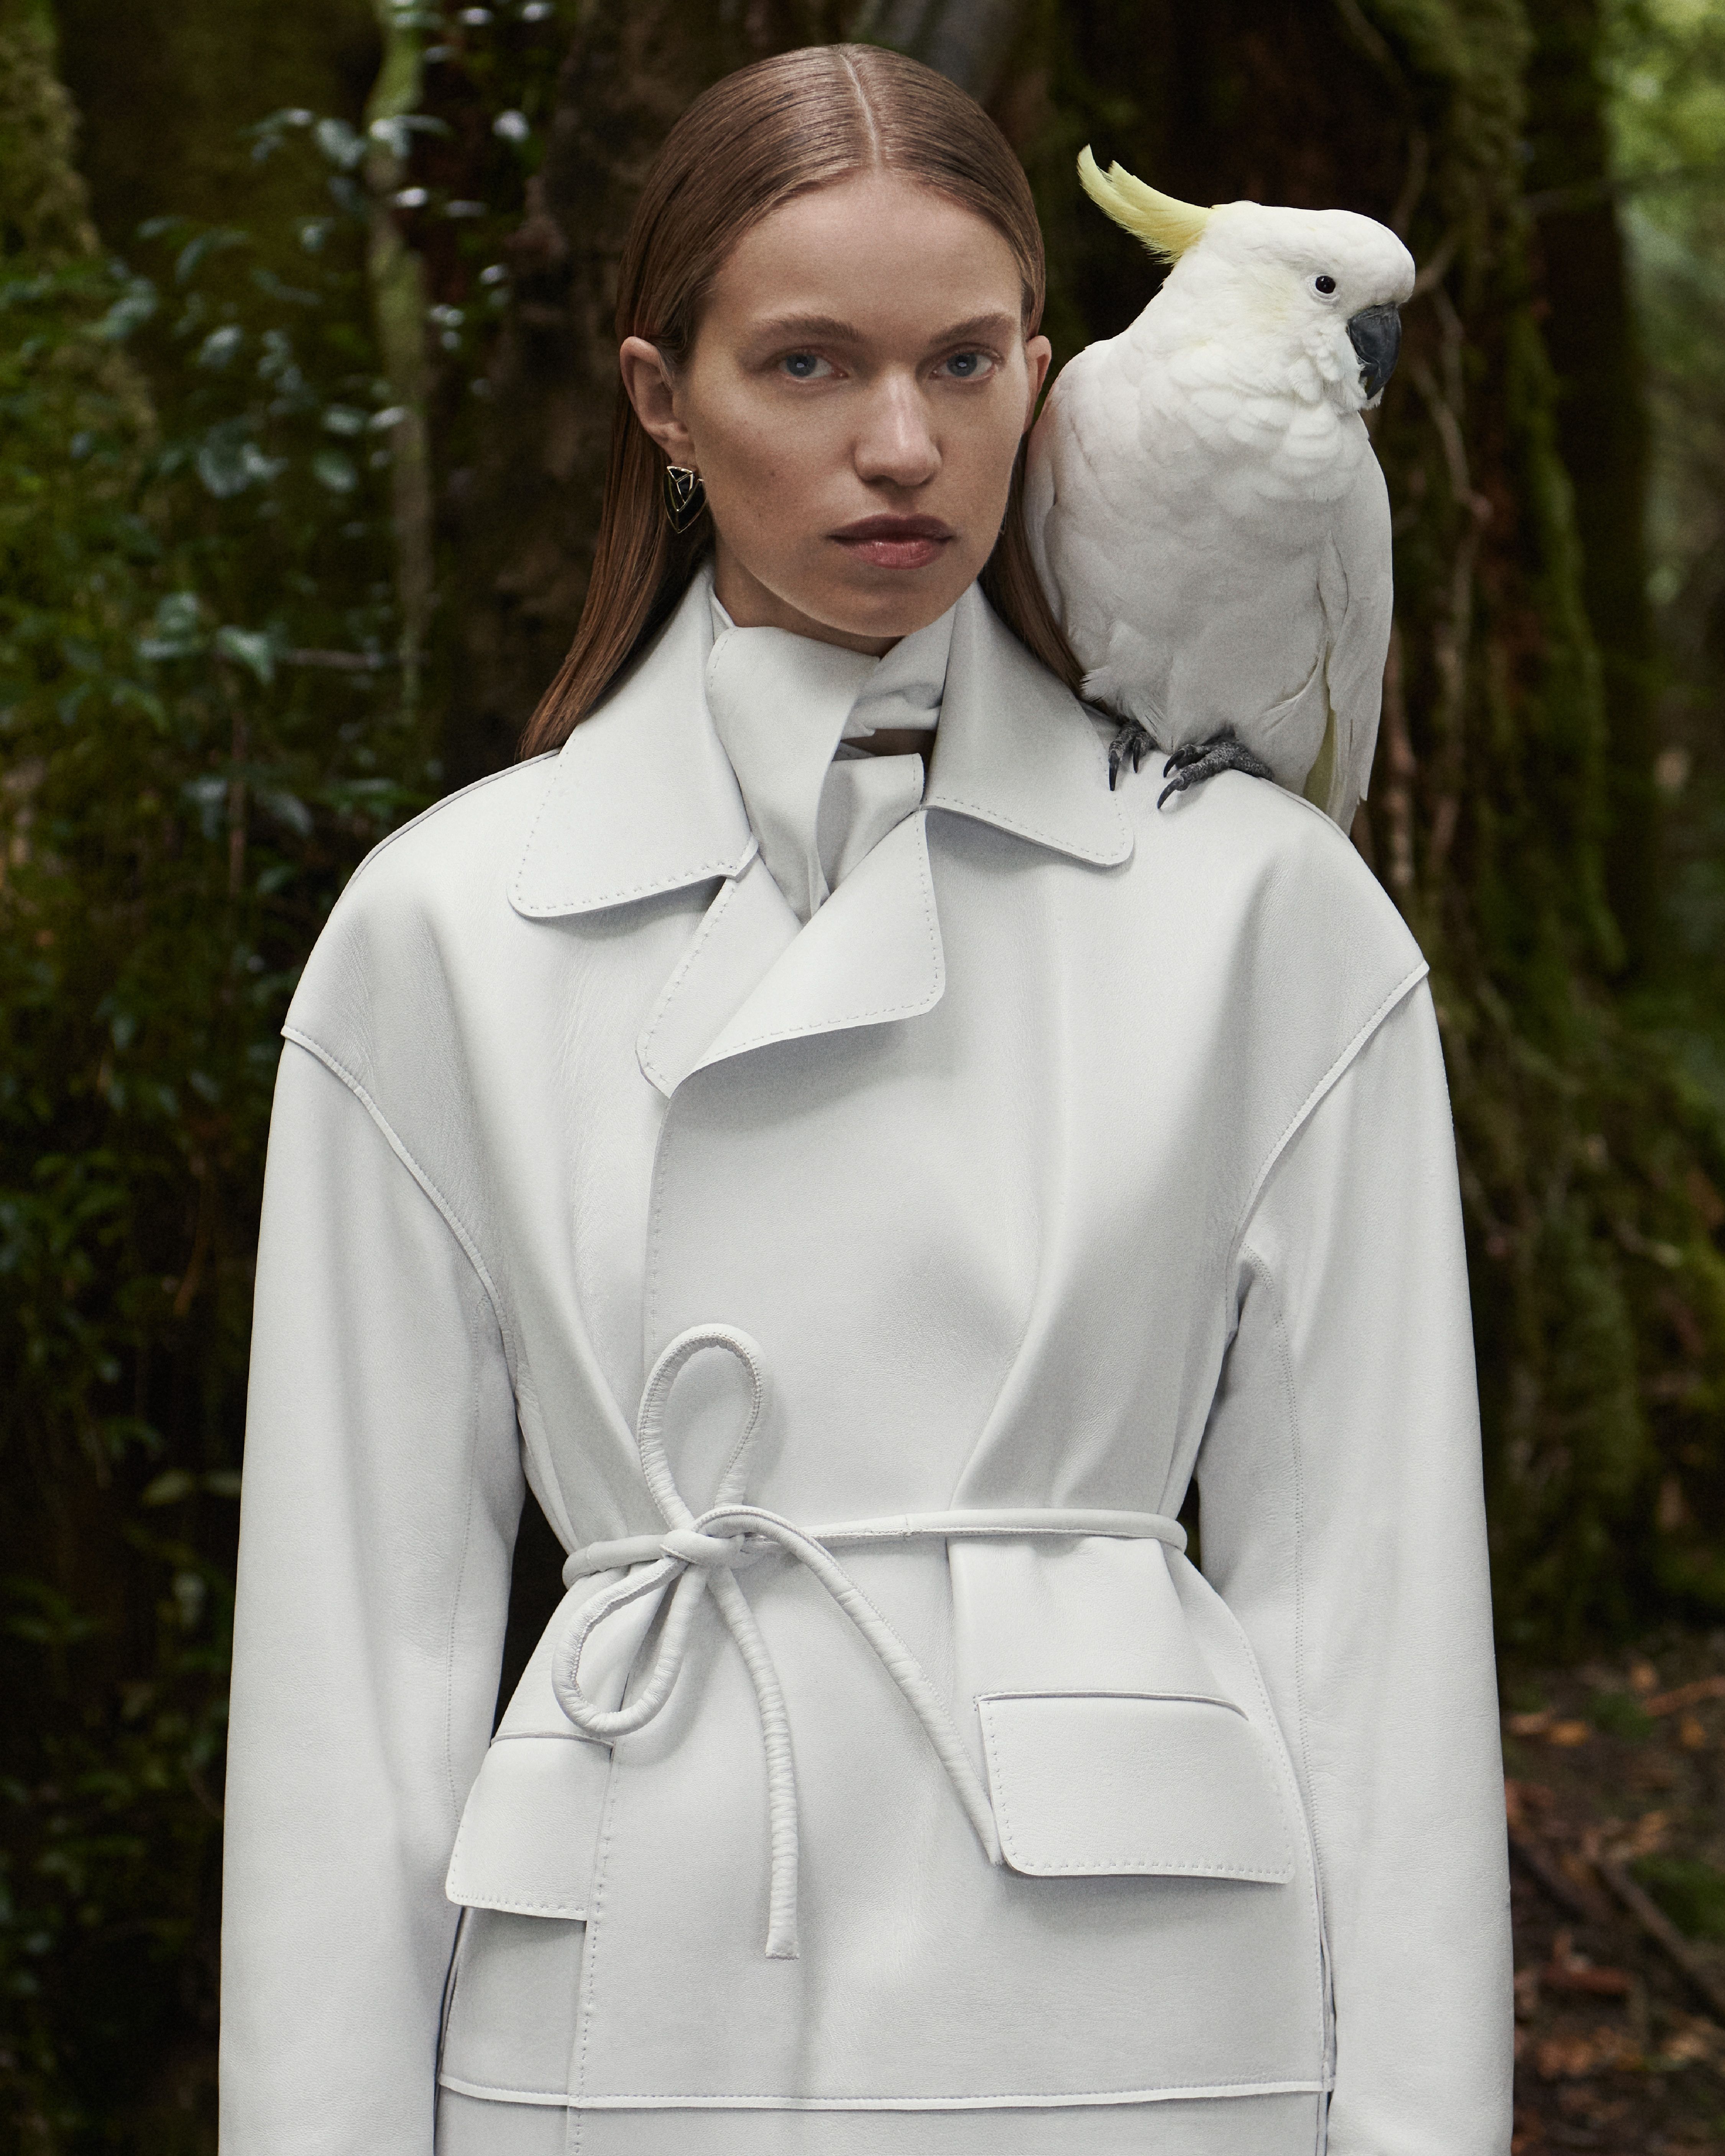 Sabine Glud standing in the forest wearing a white leather jacket with a cockatoo perched on her shoulder